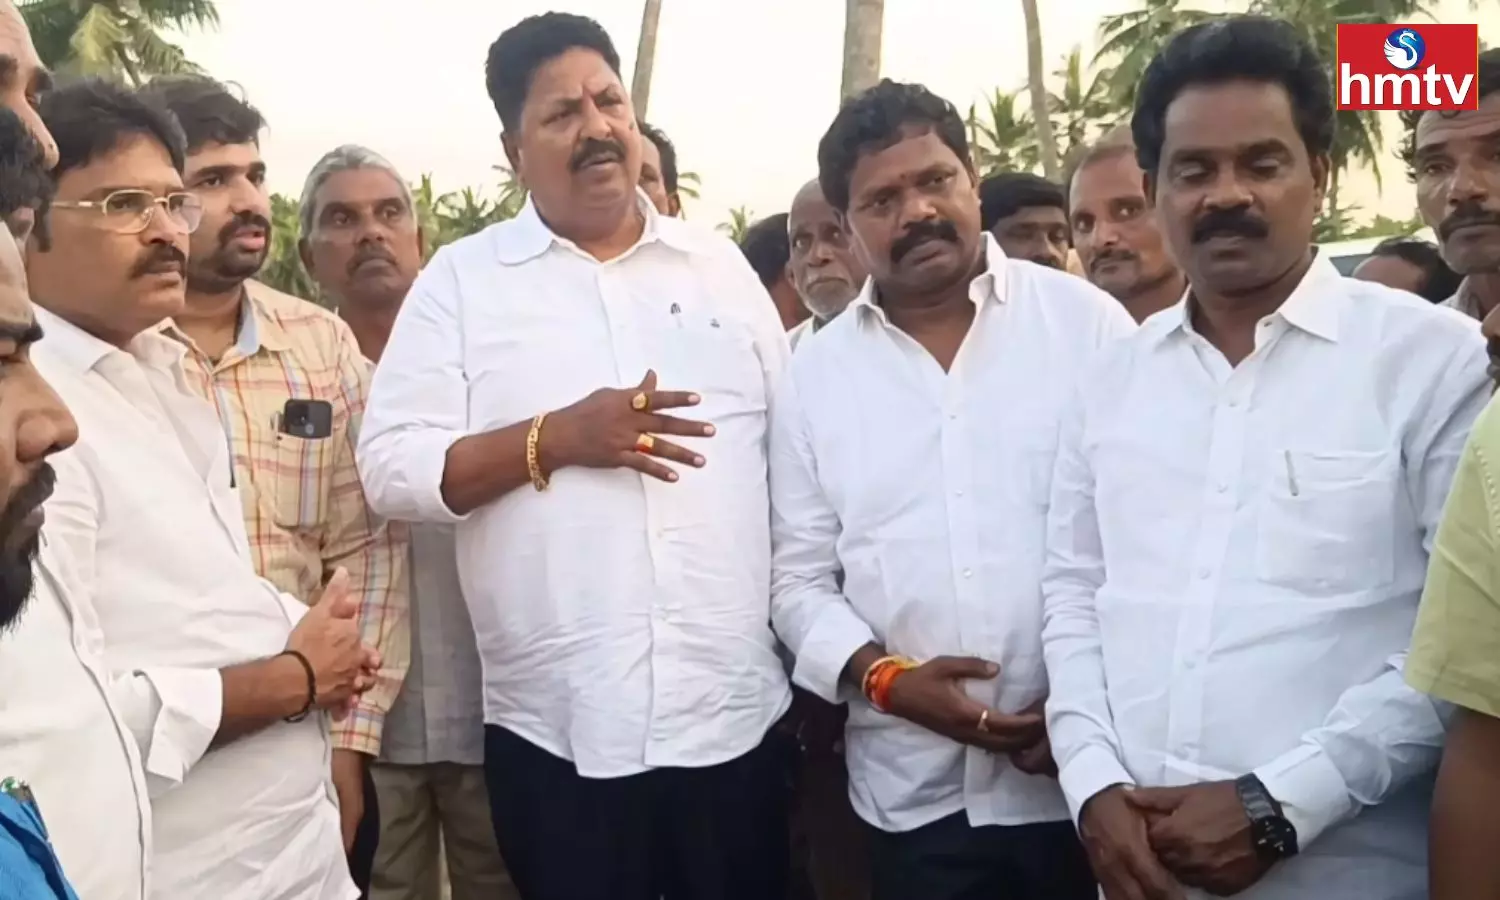 Minister Karumuri visited the Typhoon Affected Areas